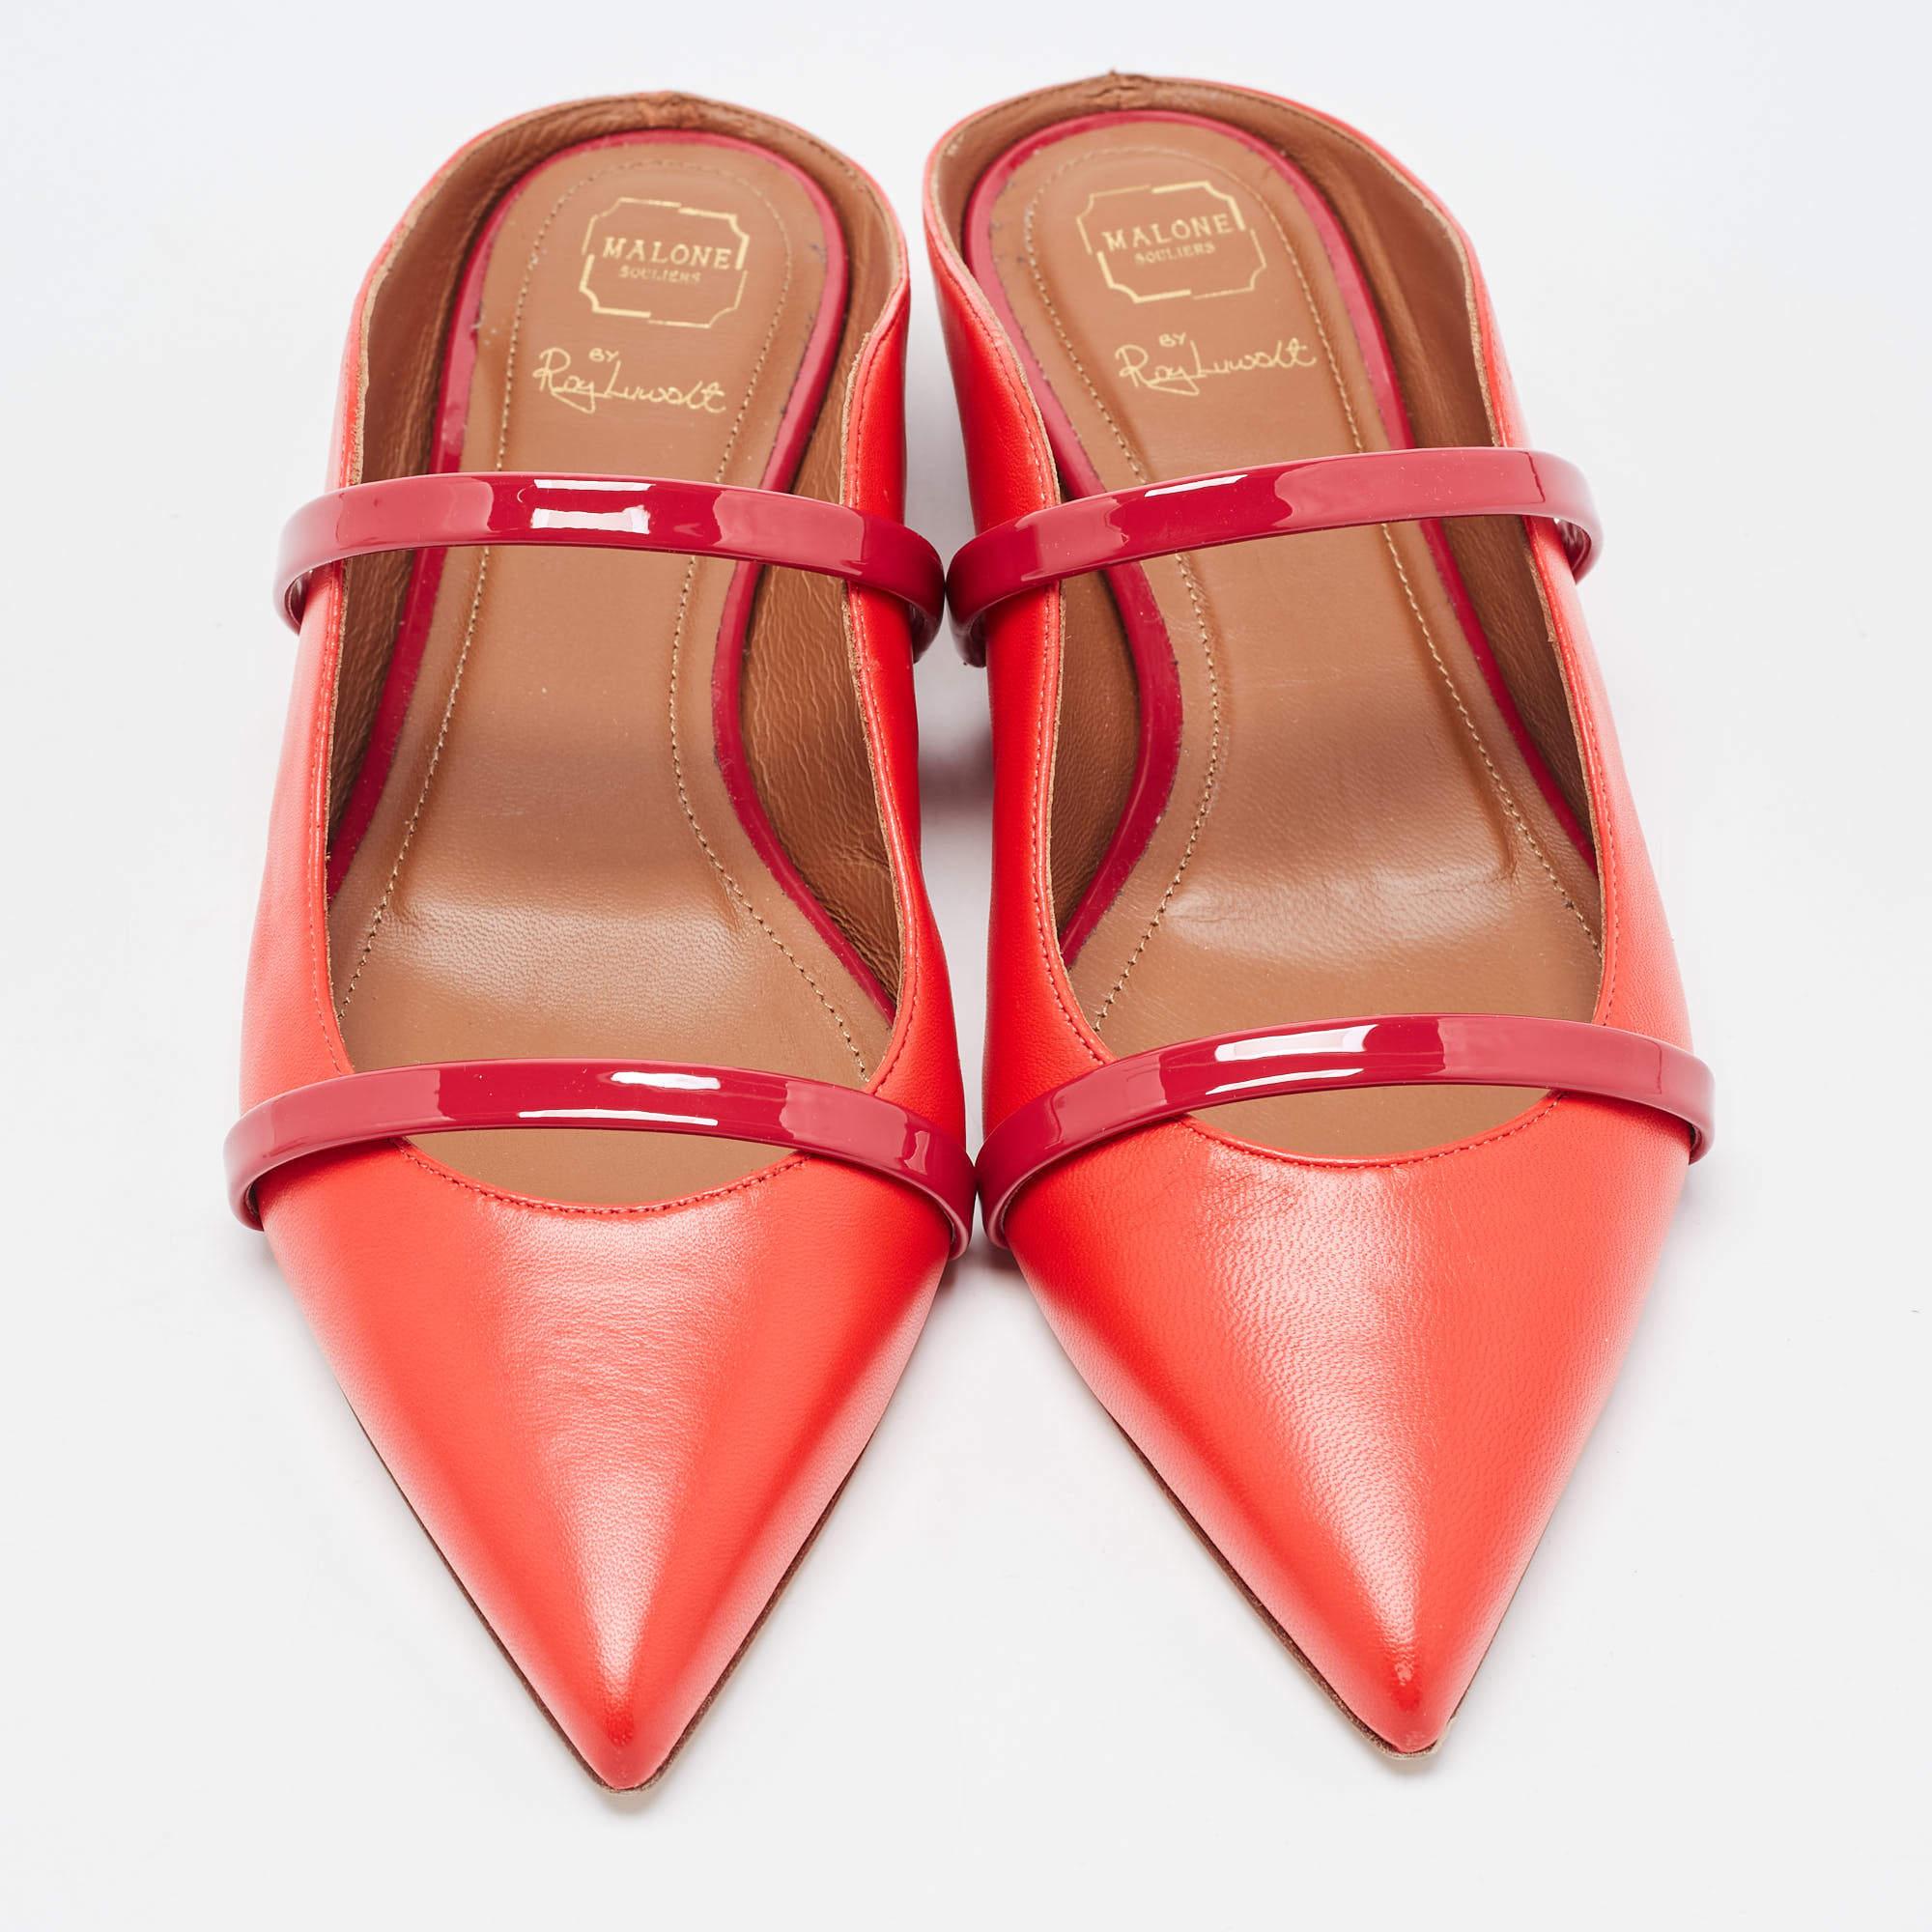 These iconic Maureen flats are not only graceful and chic but also highly comfortable. Crafted from leather in a red hue, the strap highlights the shape of your feet. The pointed-toe silhouette completes these stunning flats so that you can flaunt